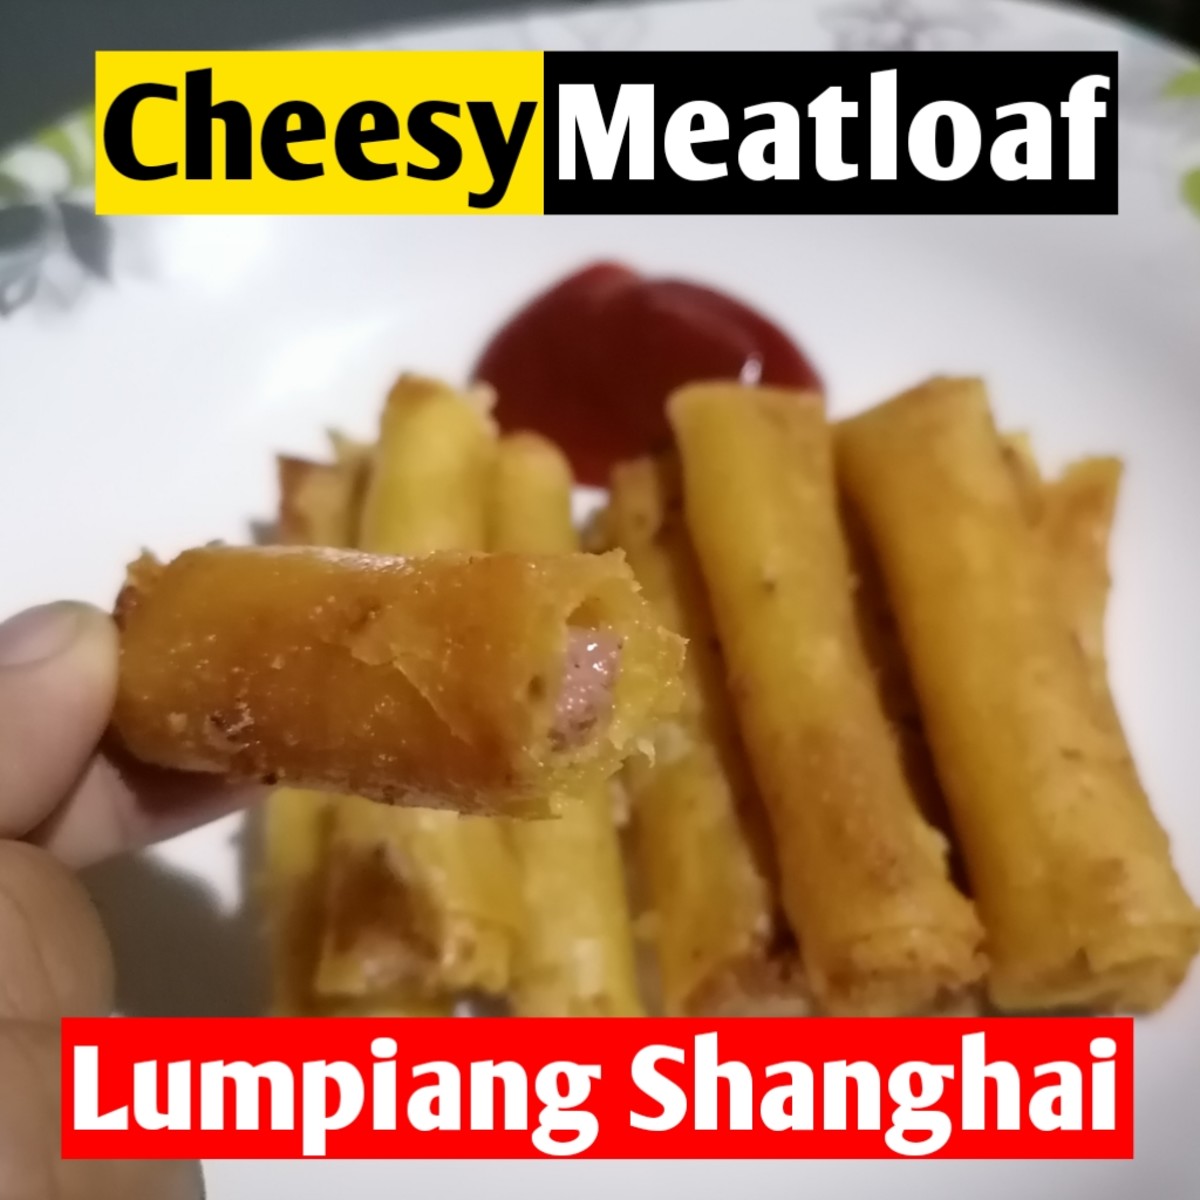 Cheesy Meatloaf Lumpiang Shanghai